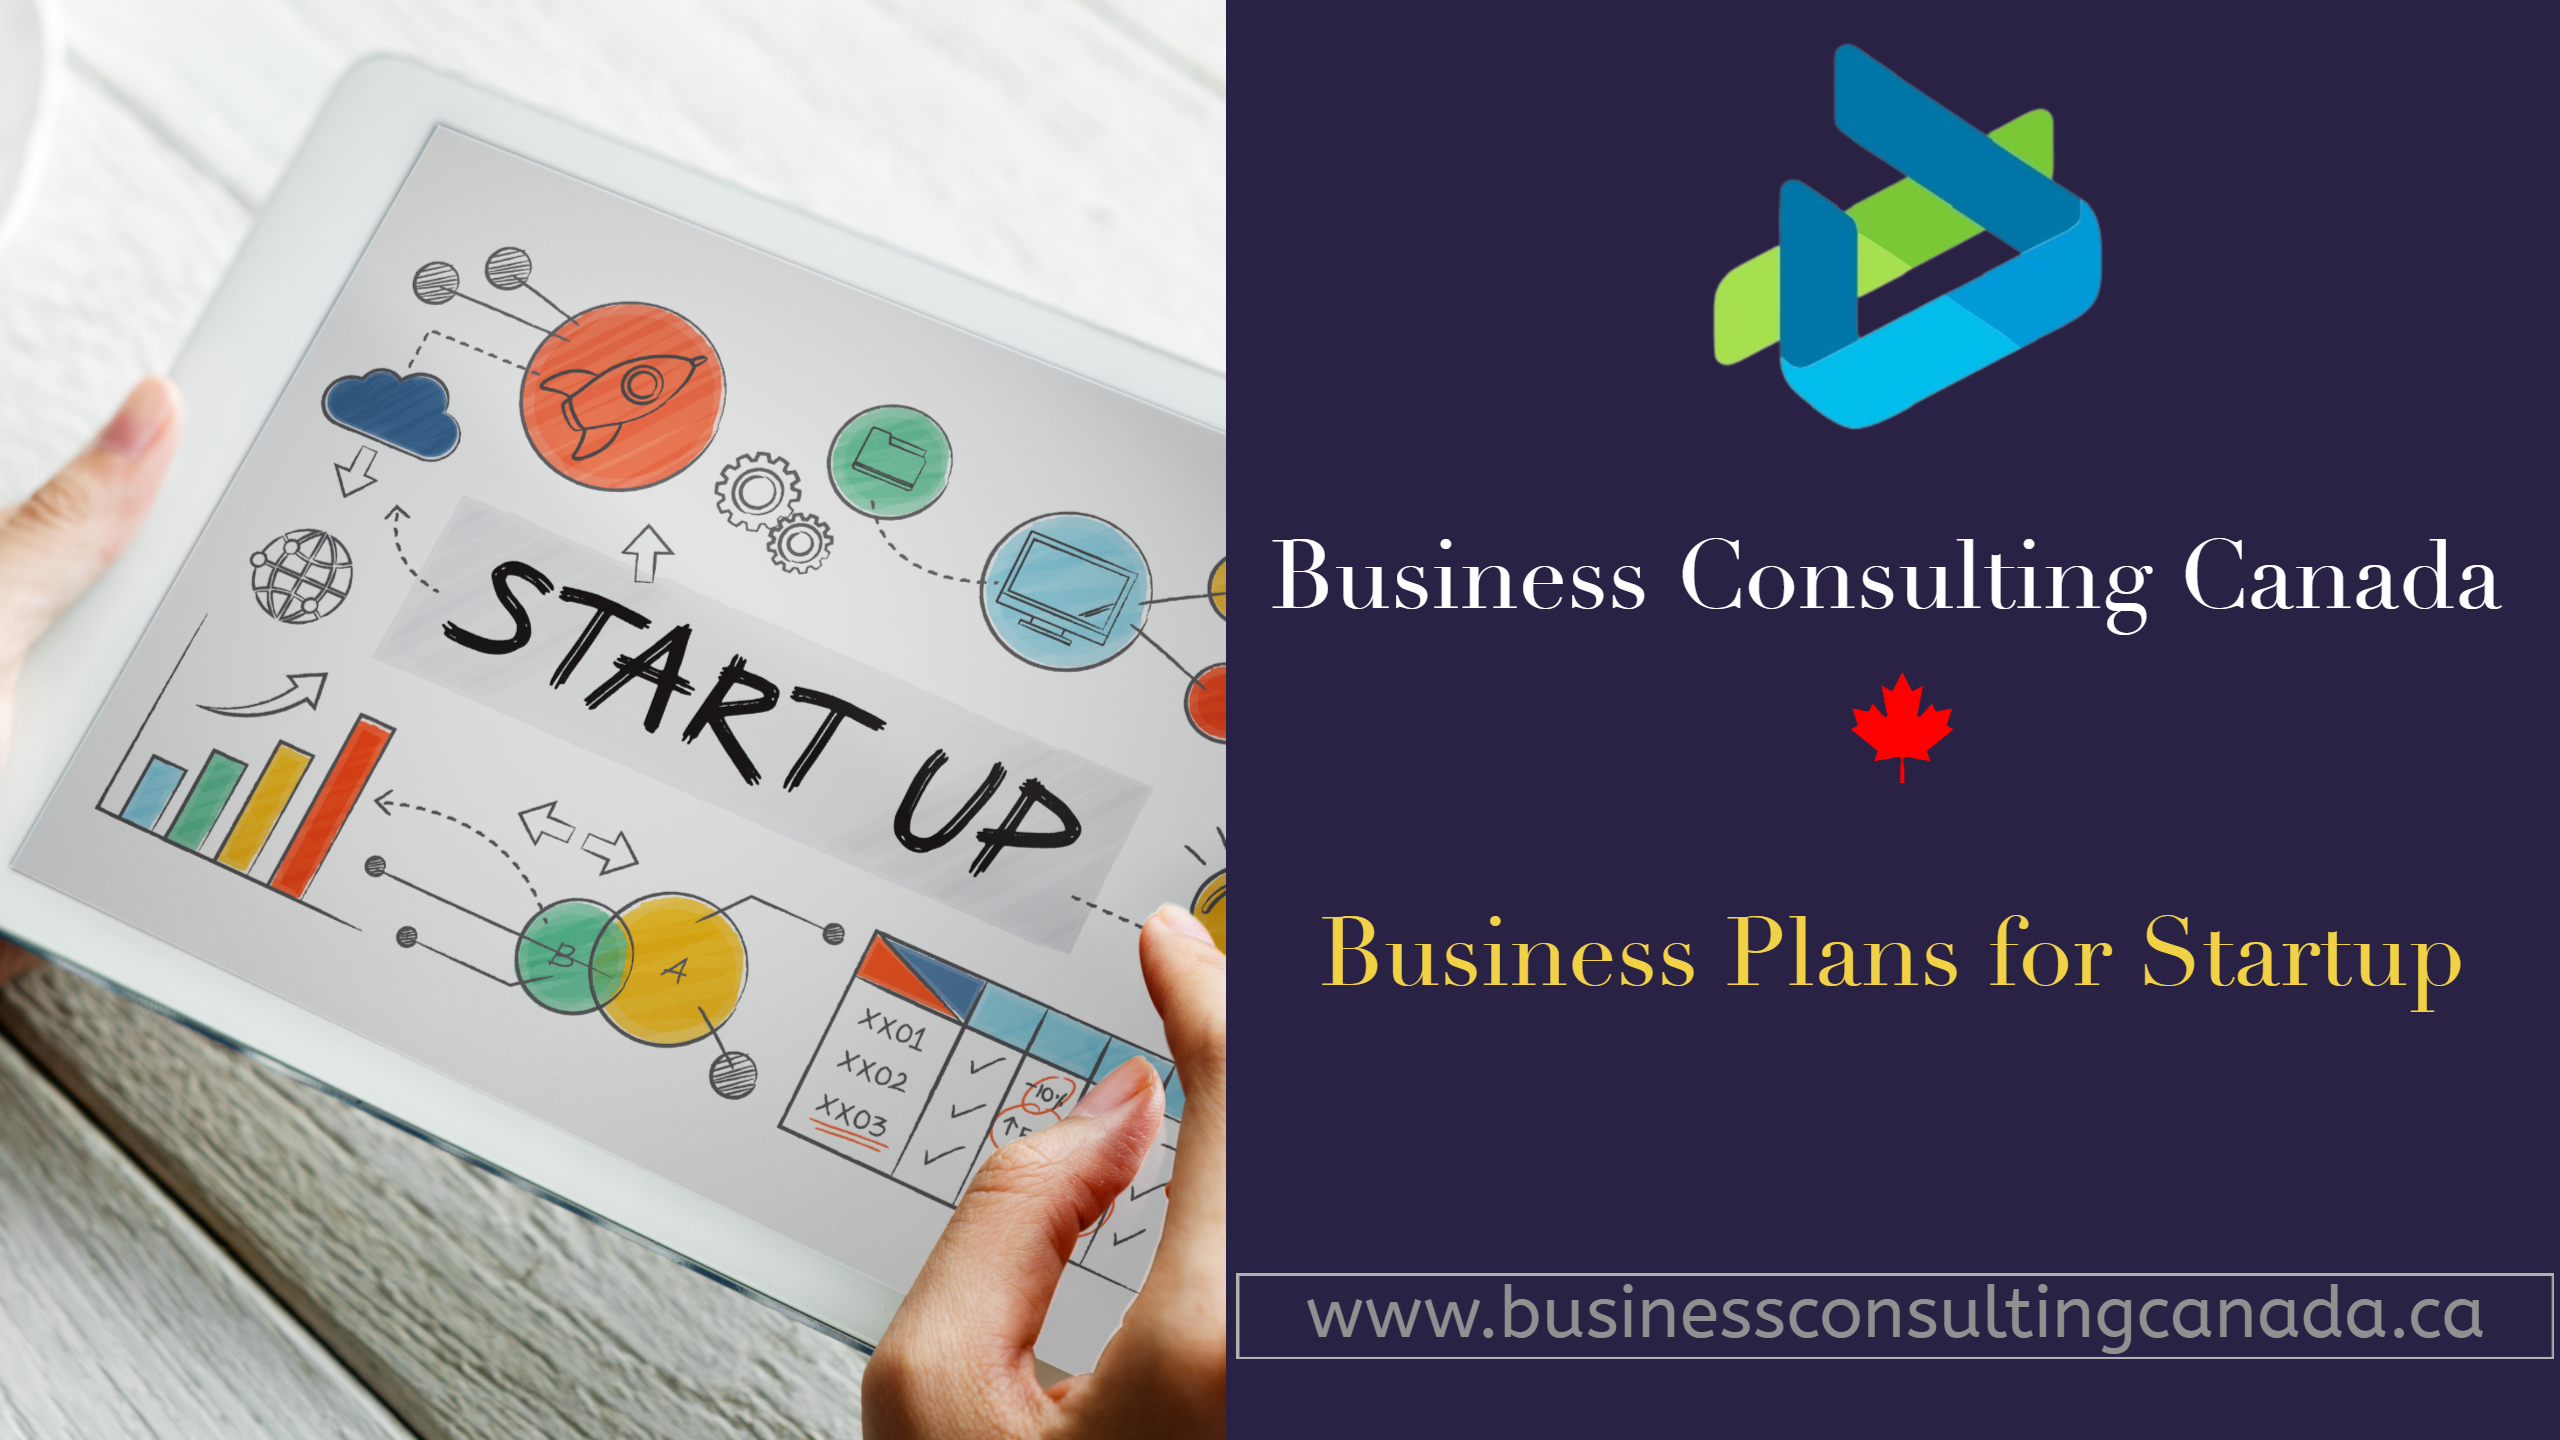 Business Plans for Startup